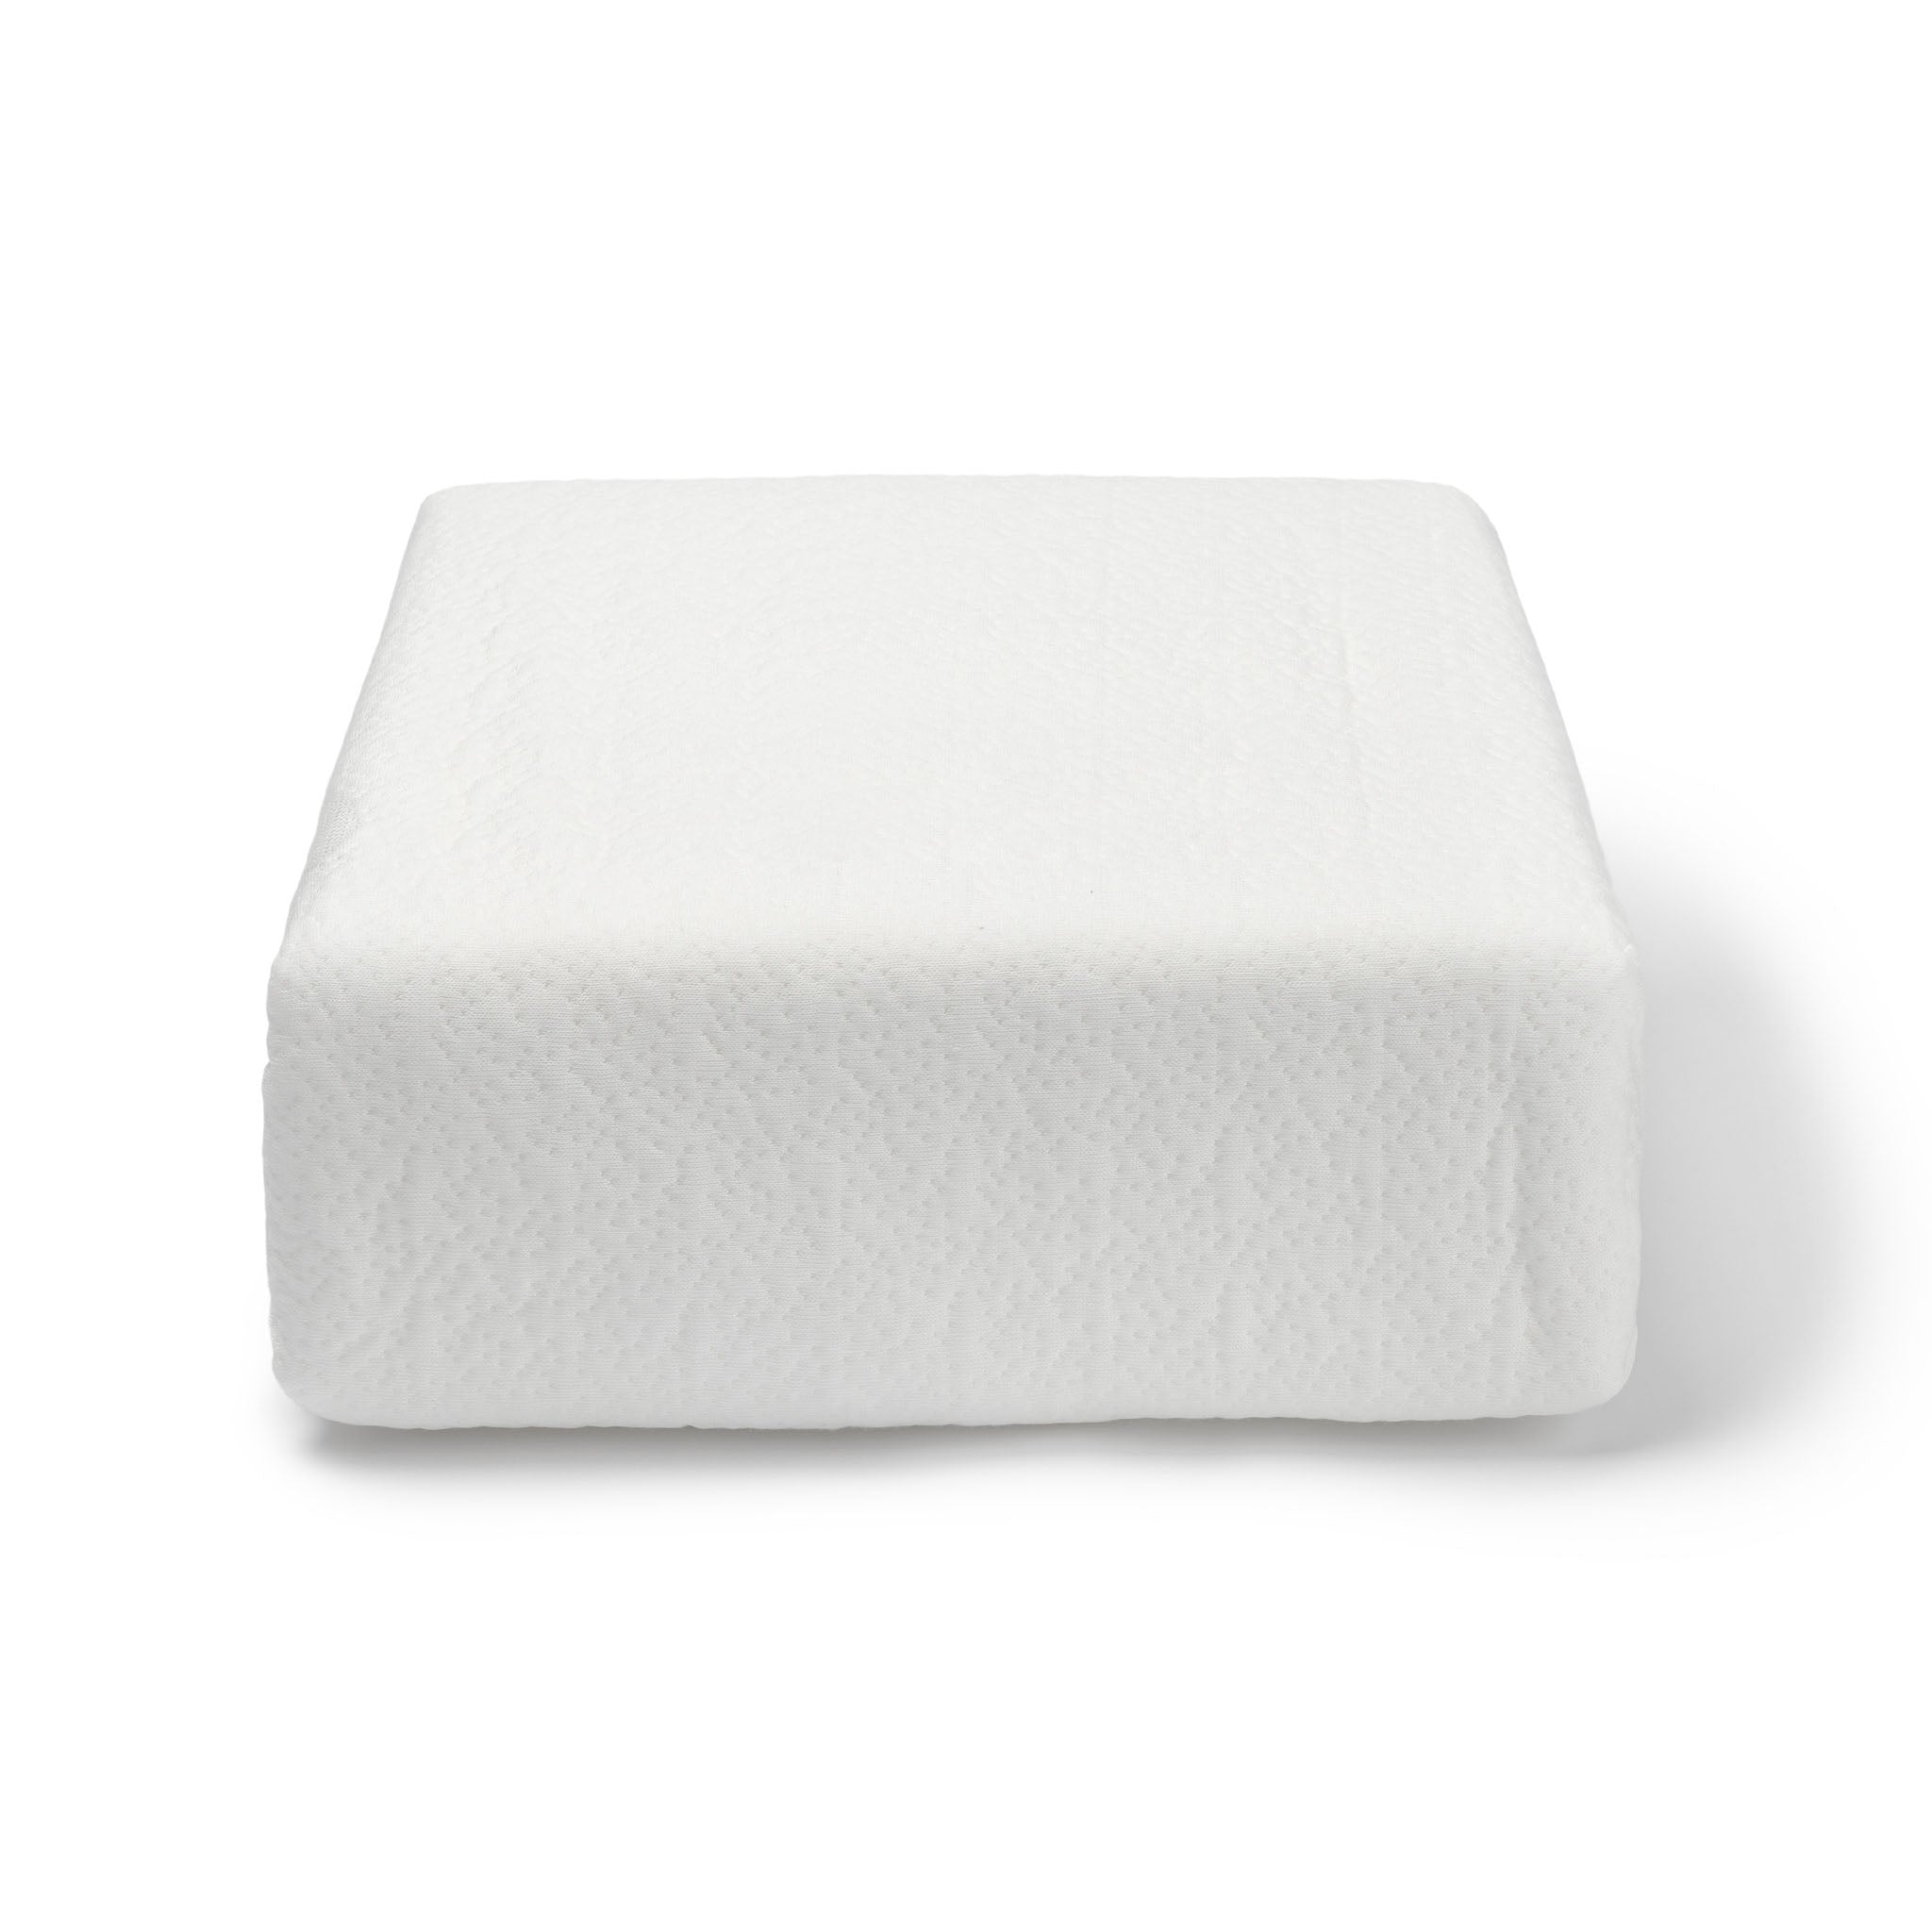 Shop Mattress Protectors by Helix  Cooling Technology and Waterproof -  Helix Sleep